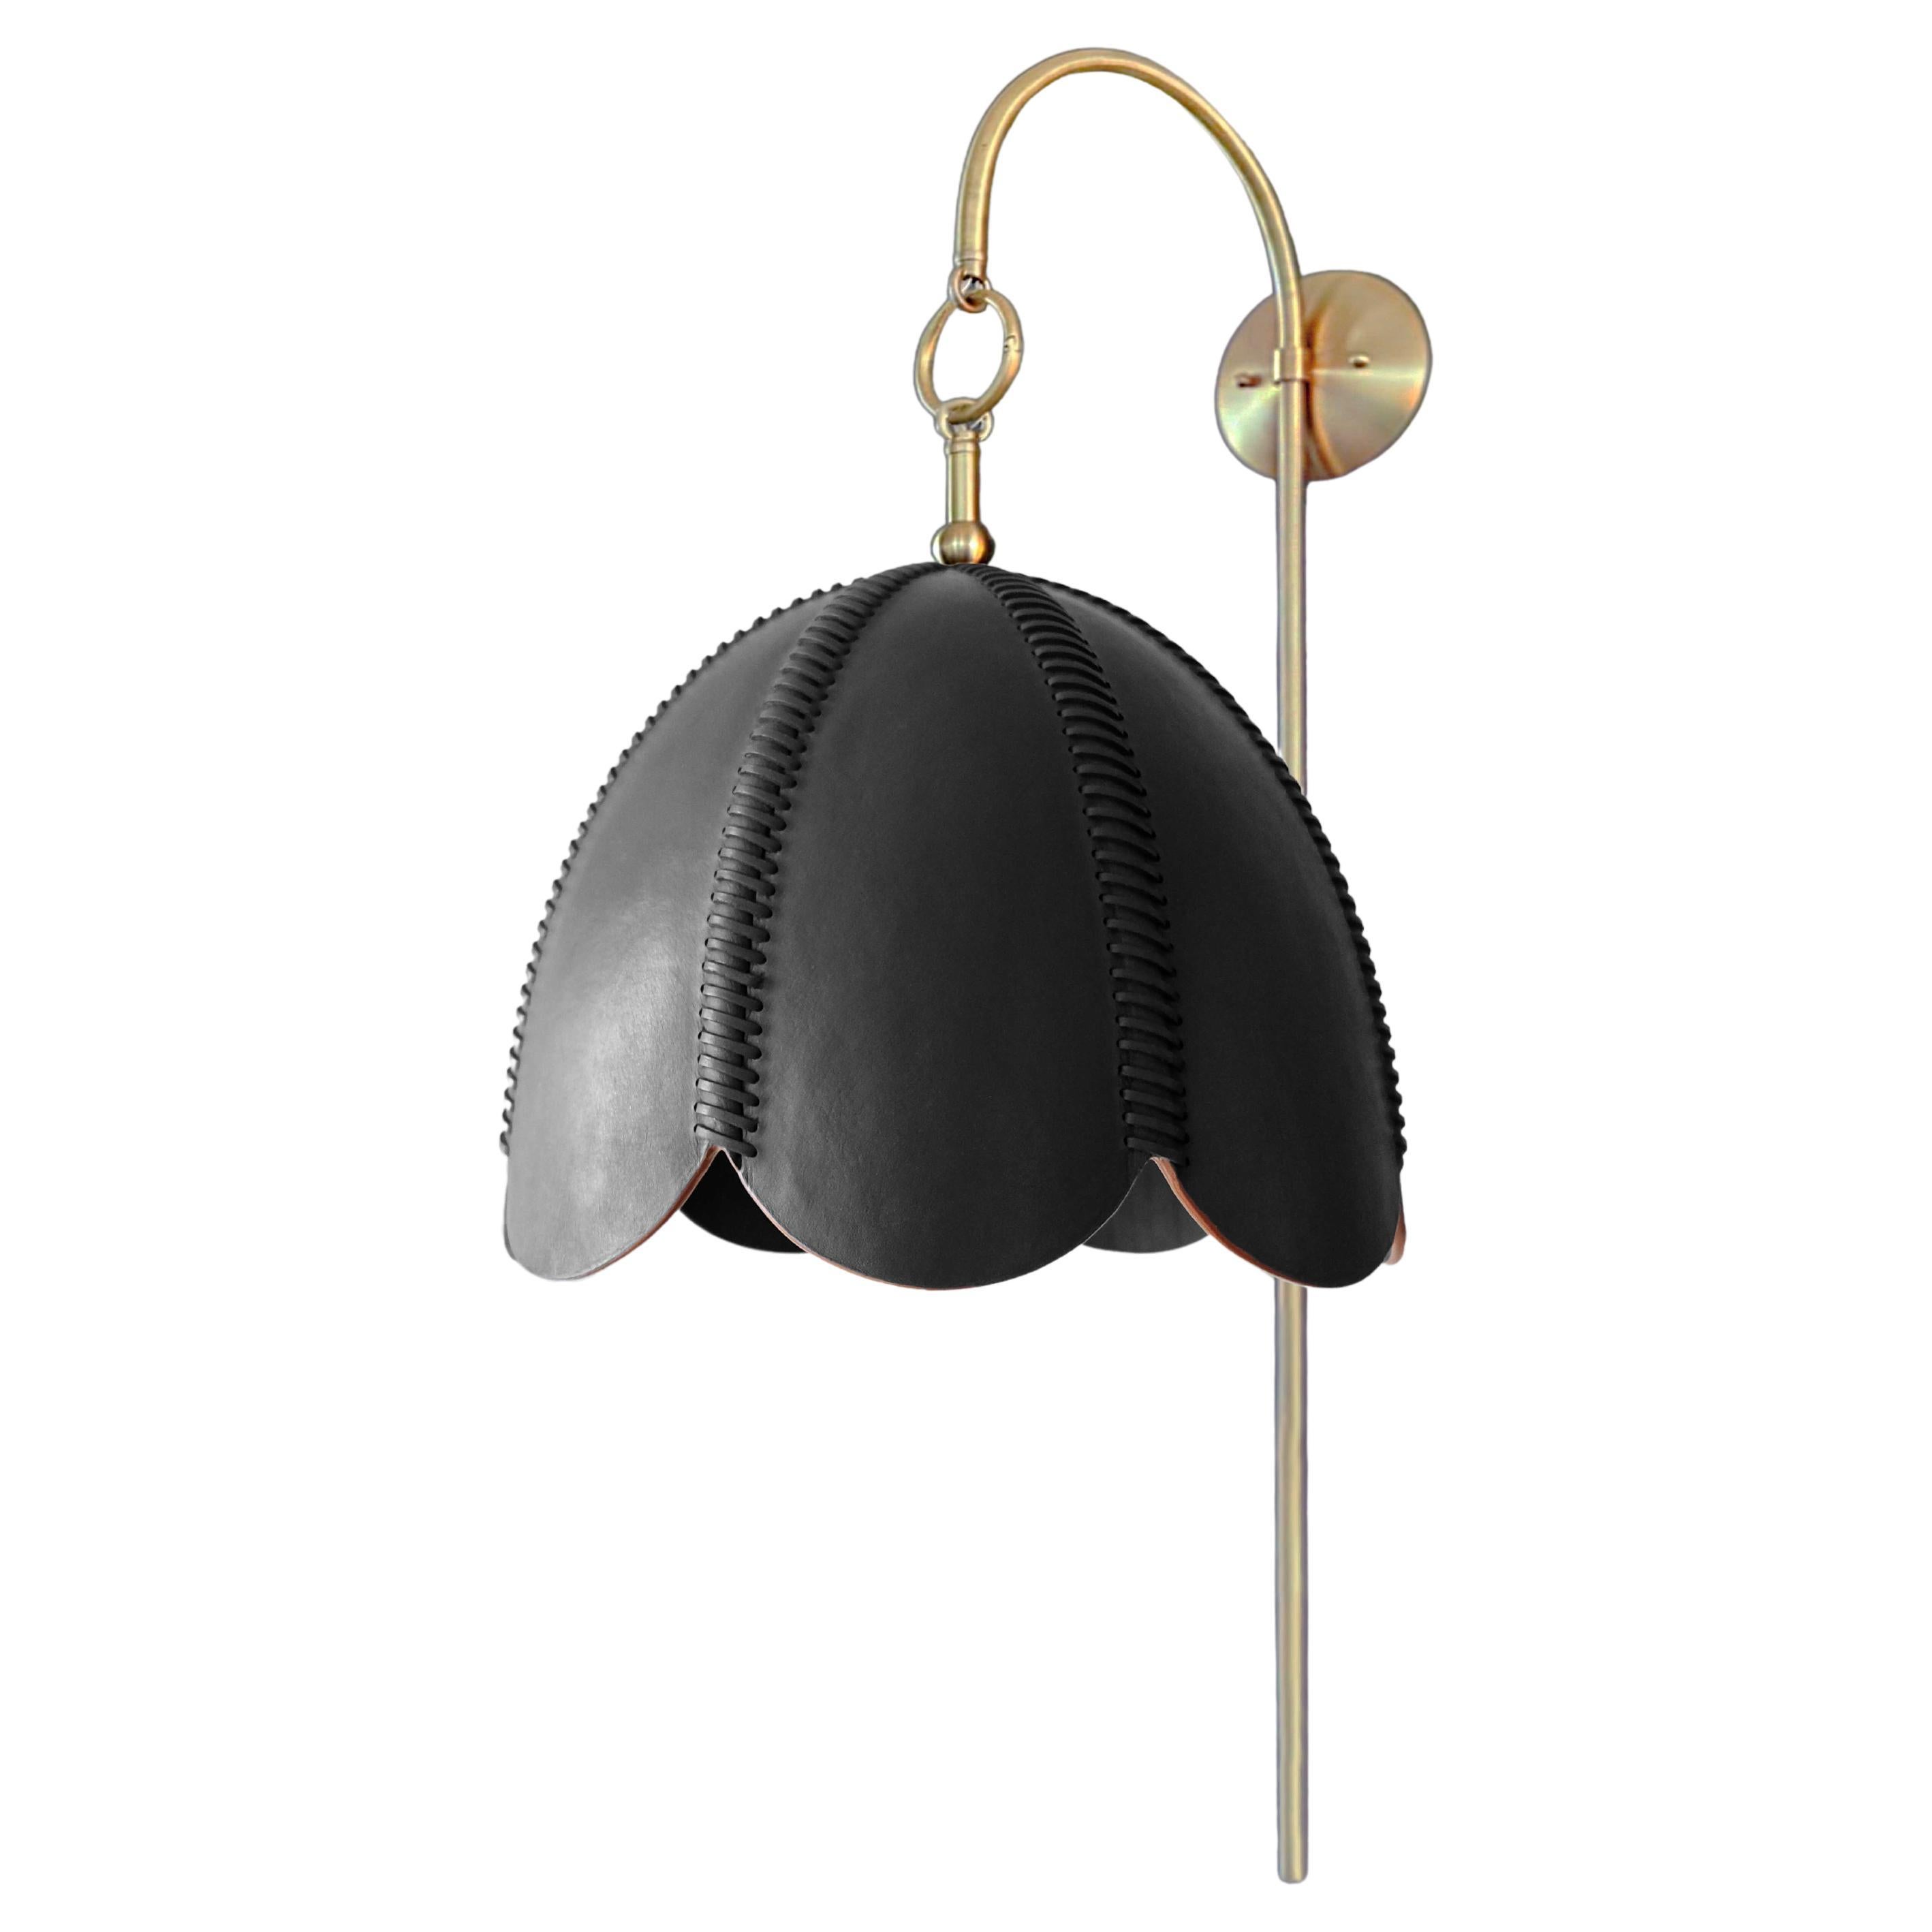 Leather Arched Sconce, Black, Large, Doma, Saddle Lamp Collection For Sale